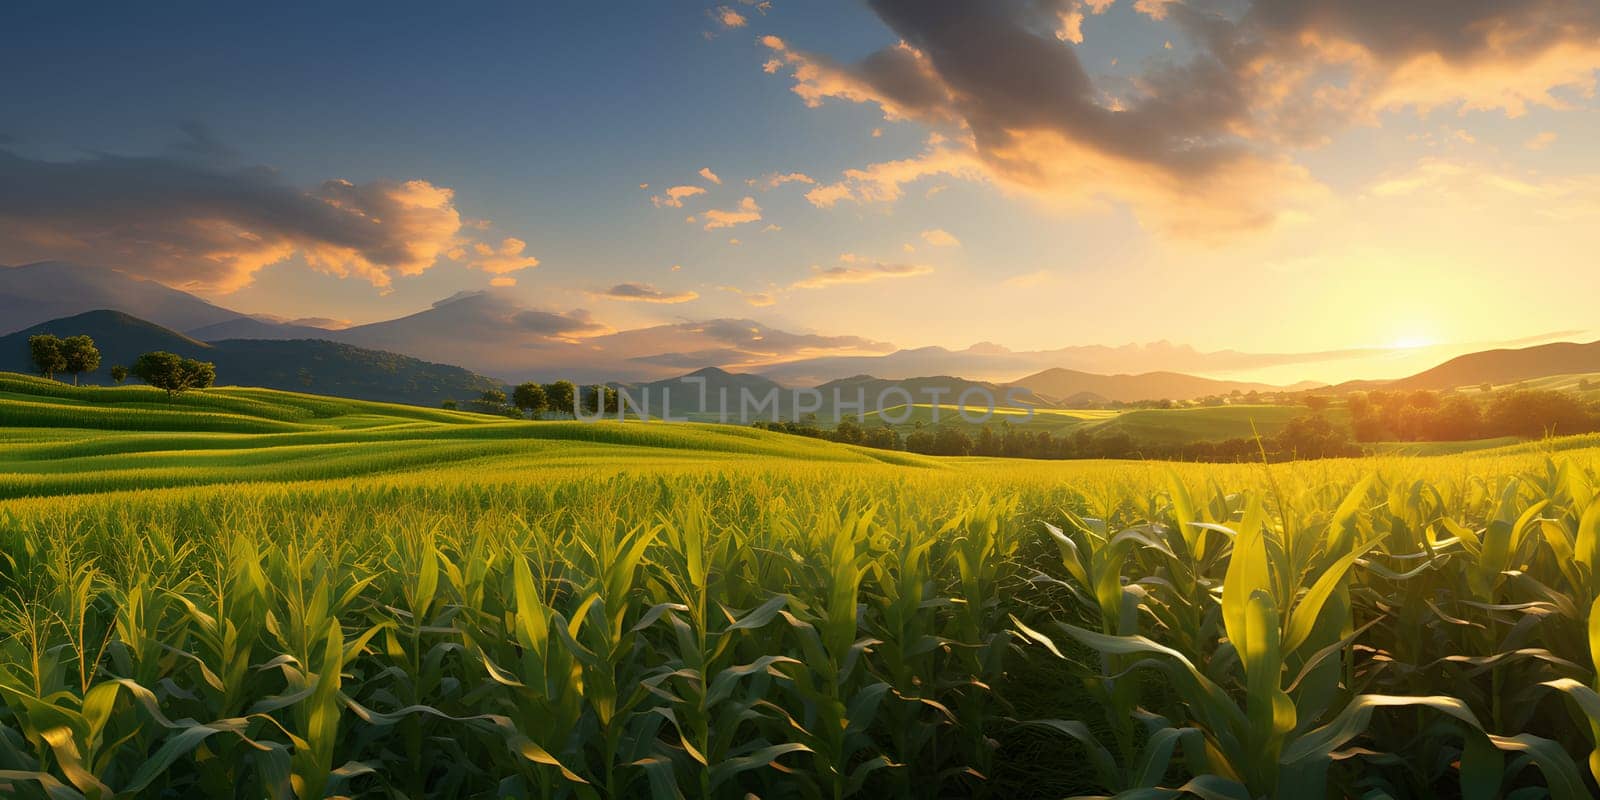 Photo on stretching corn field of meadows, trees, mountains, sunset or sunrise. Corn as a dish of thanksgiving for the harvest. An atmosphere of joy and celebration.